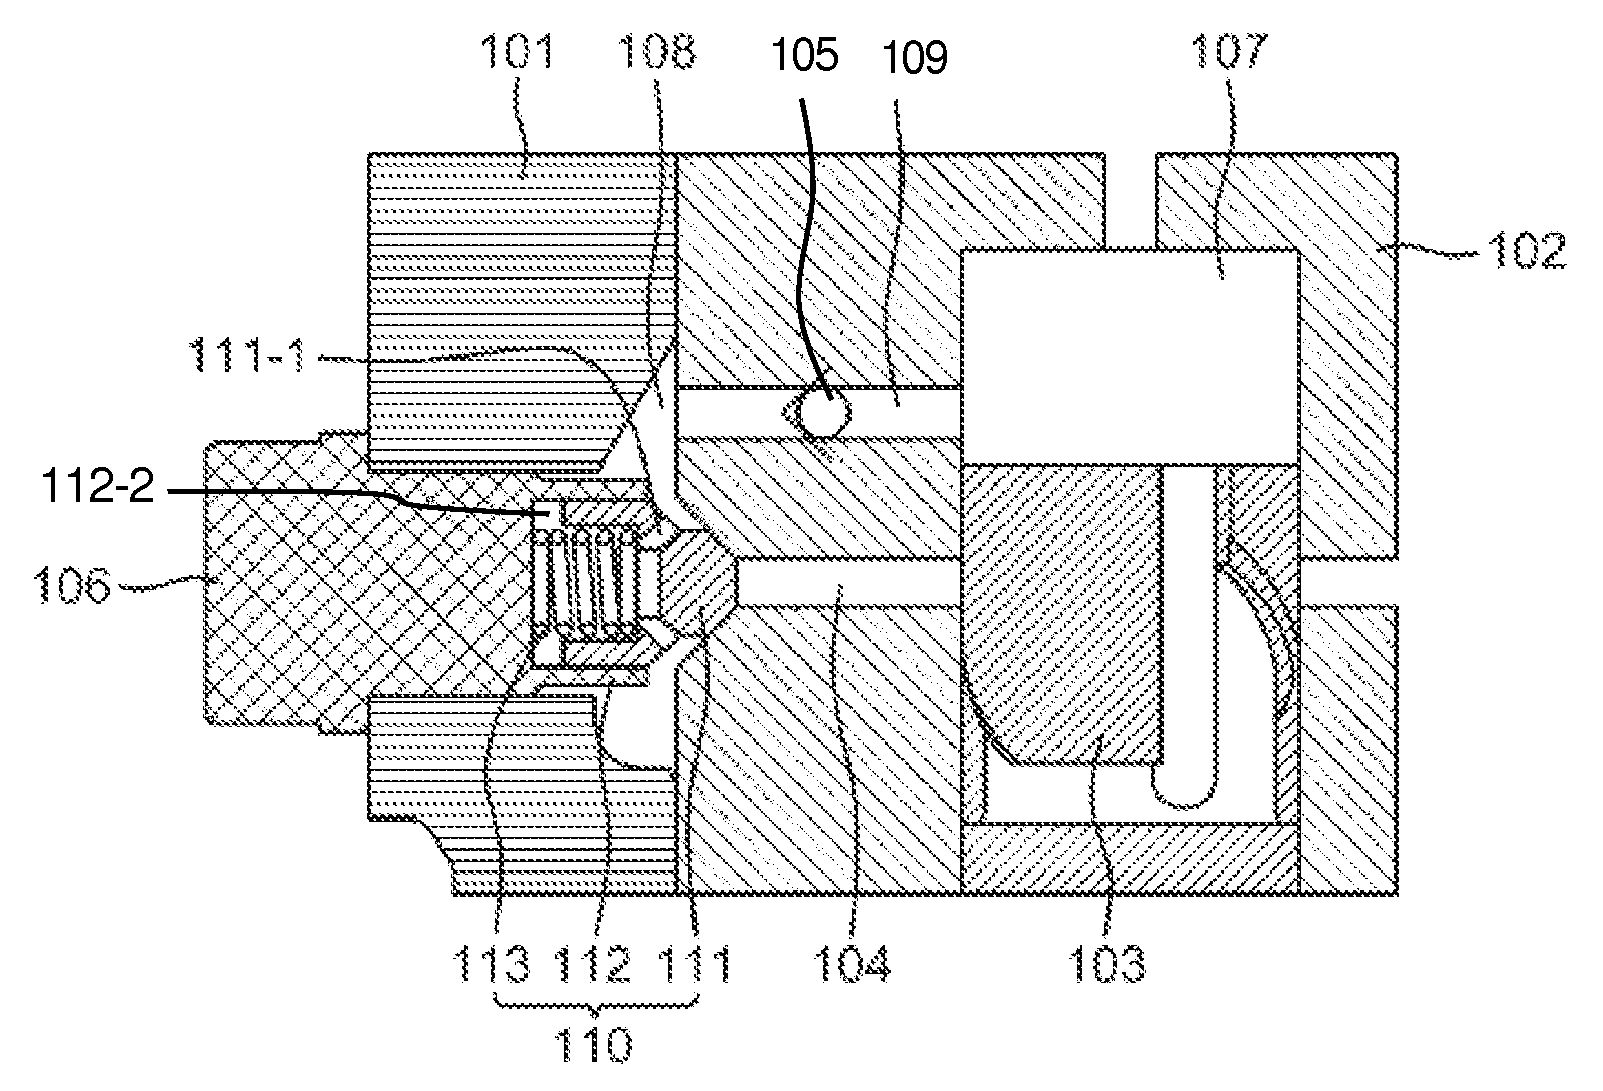 Apparatus for preventing cavitation damage to a diesel engine fuel injection pump